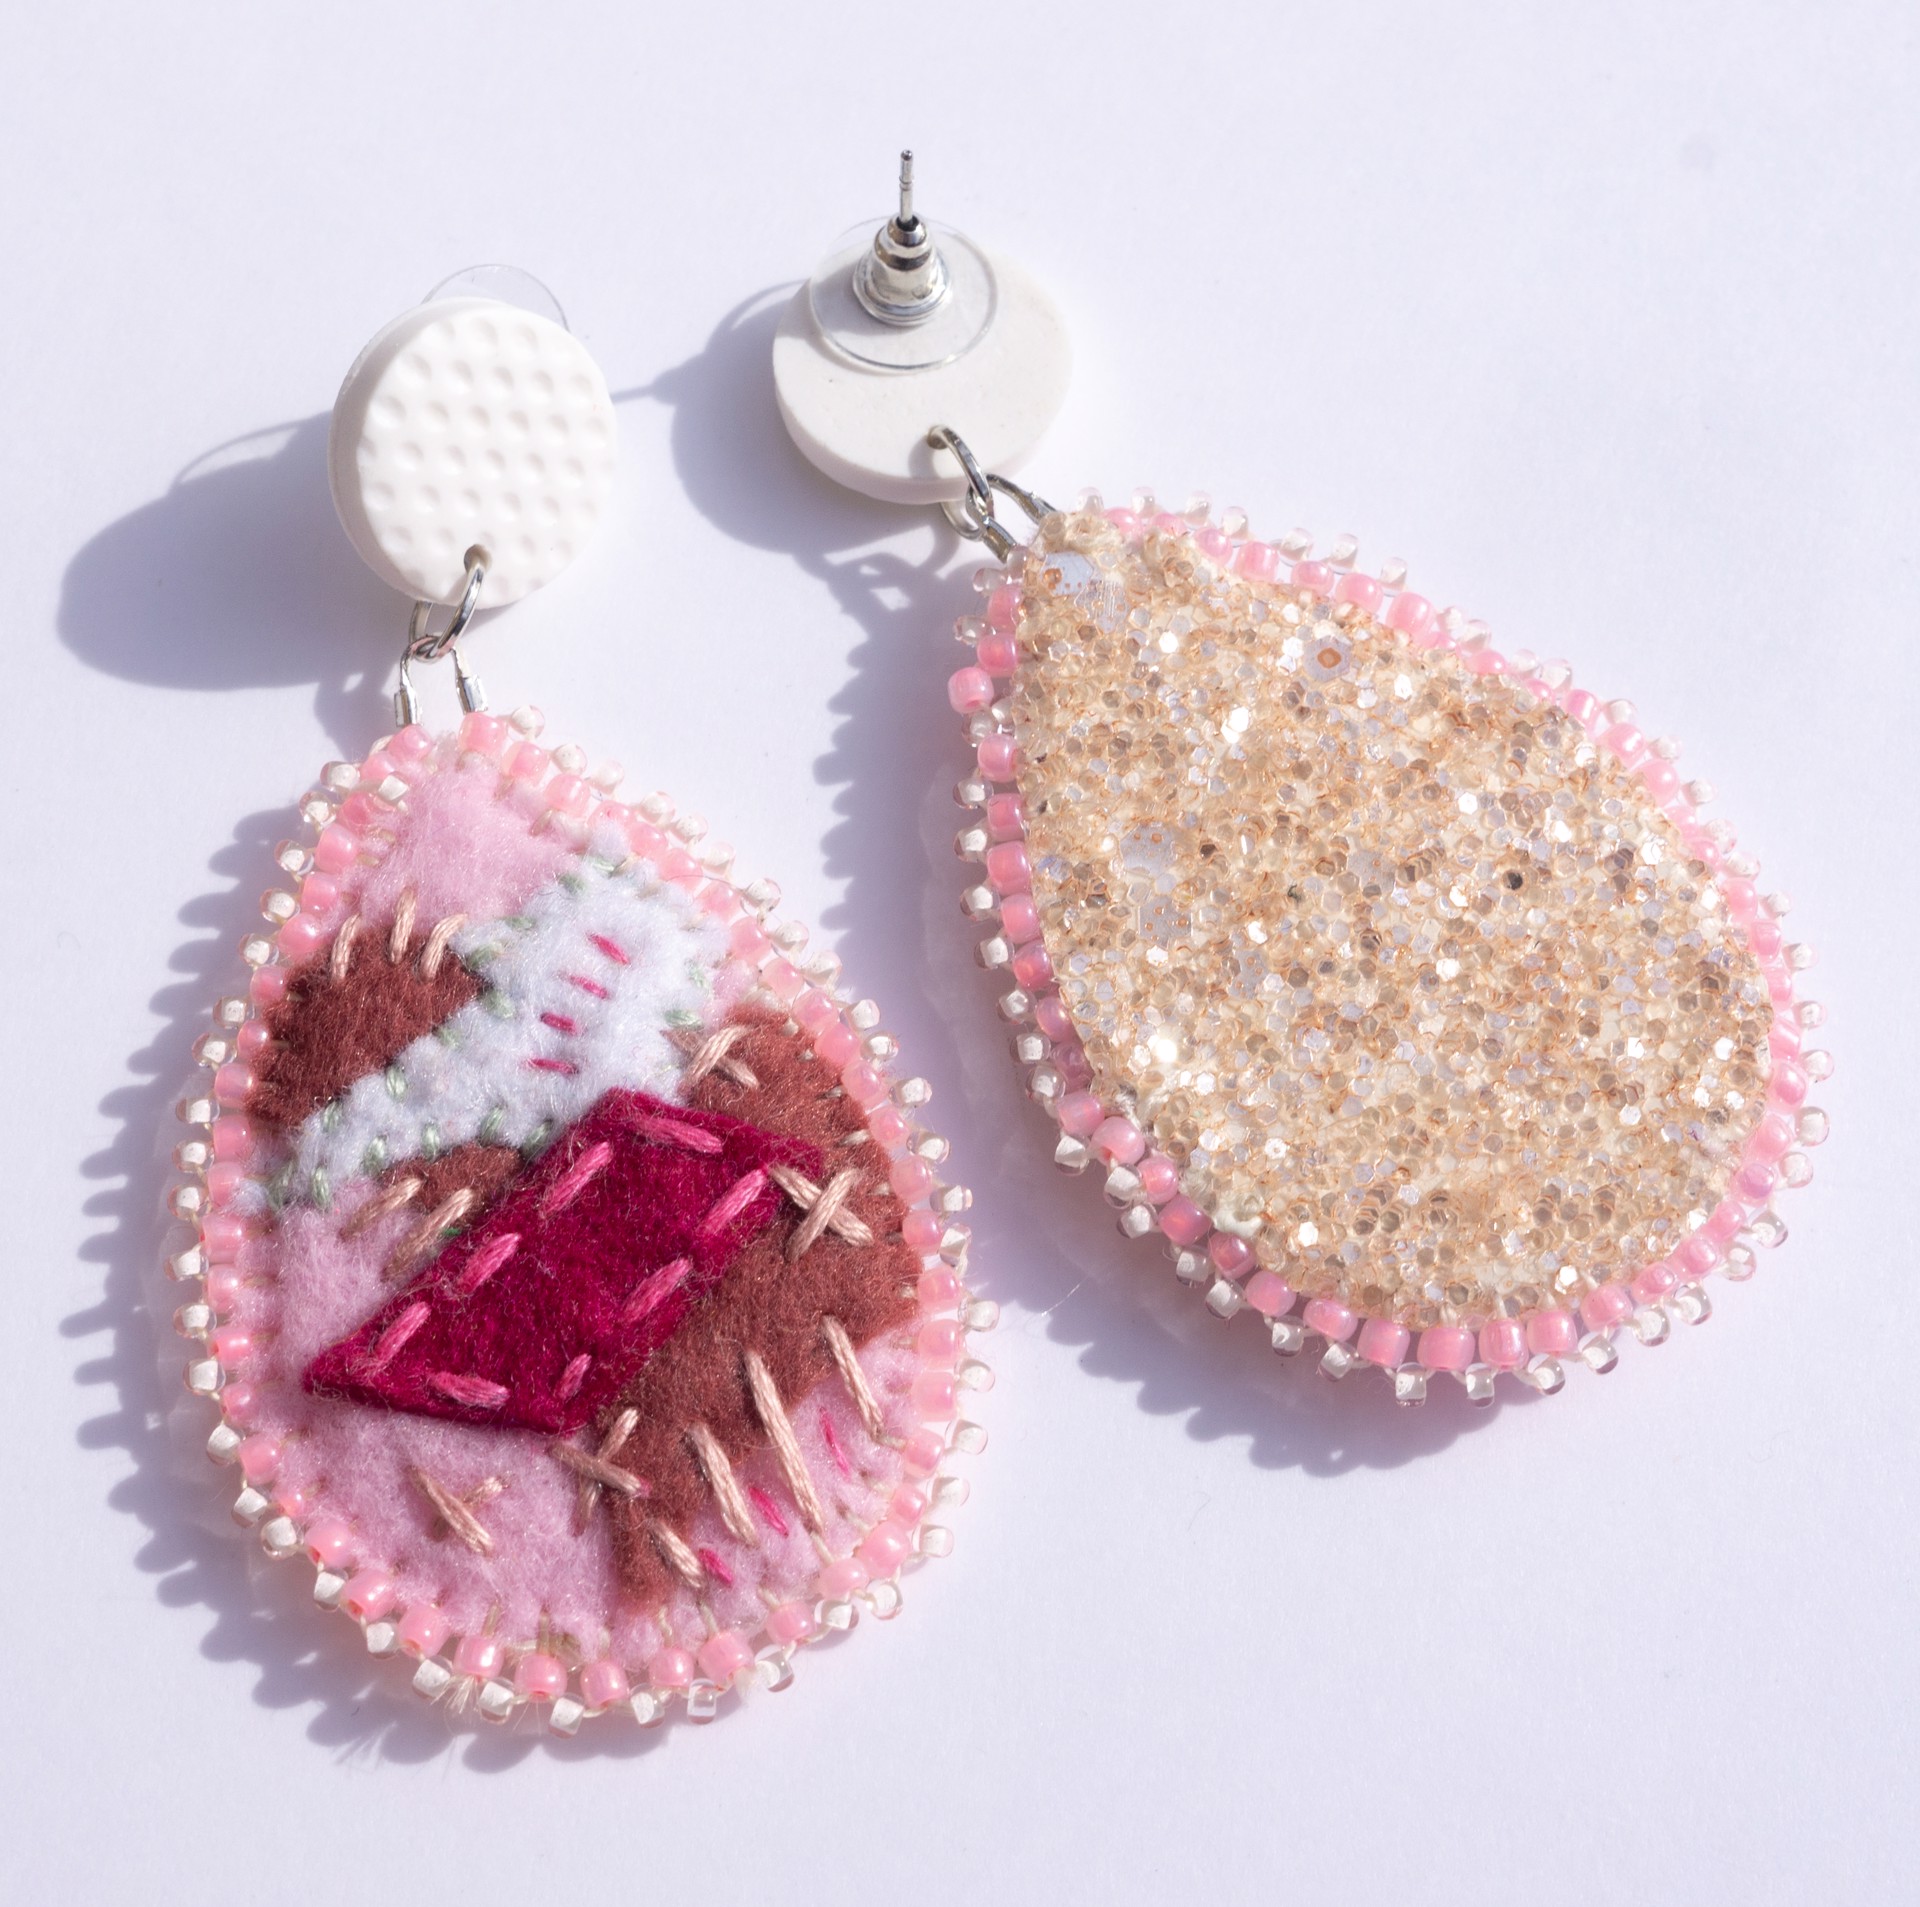 Pink embroidered earrings with white studs by Hattie Lee Mendoza